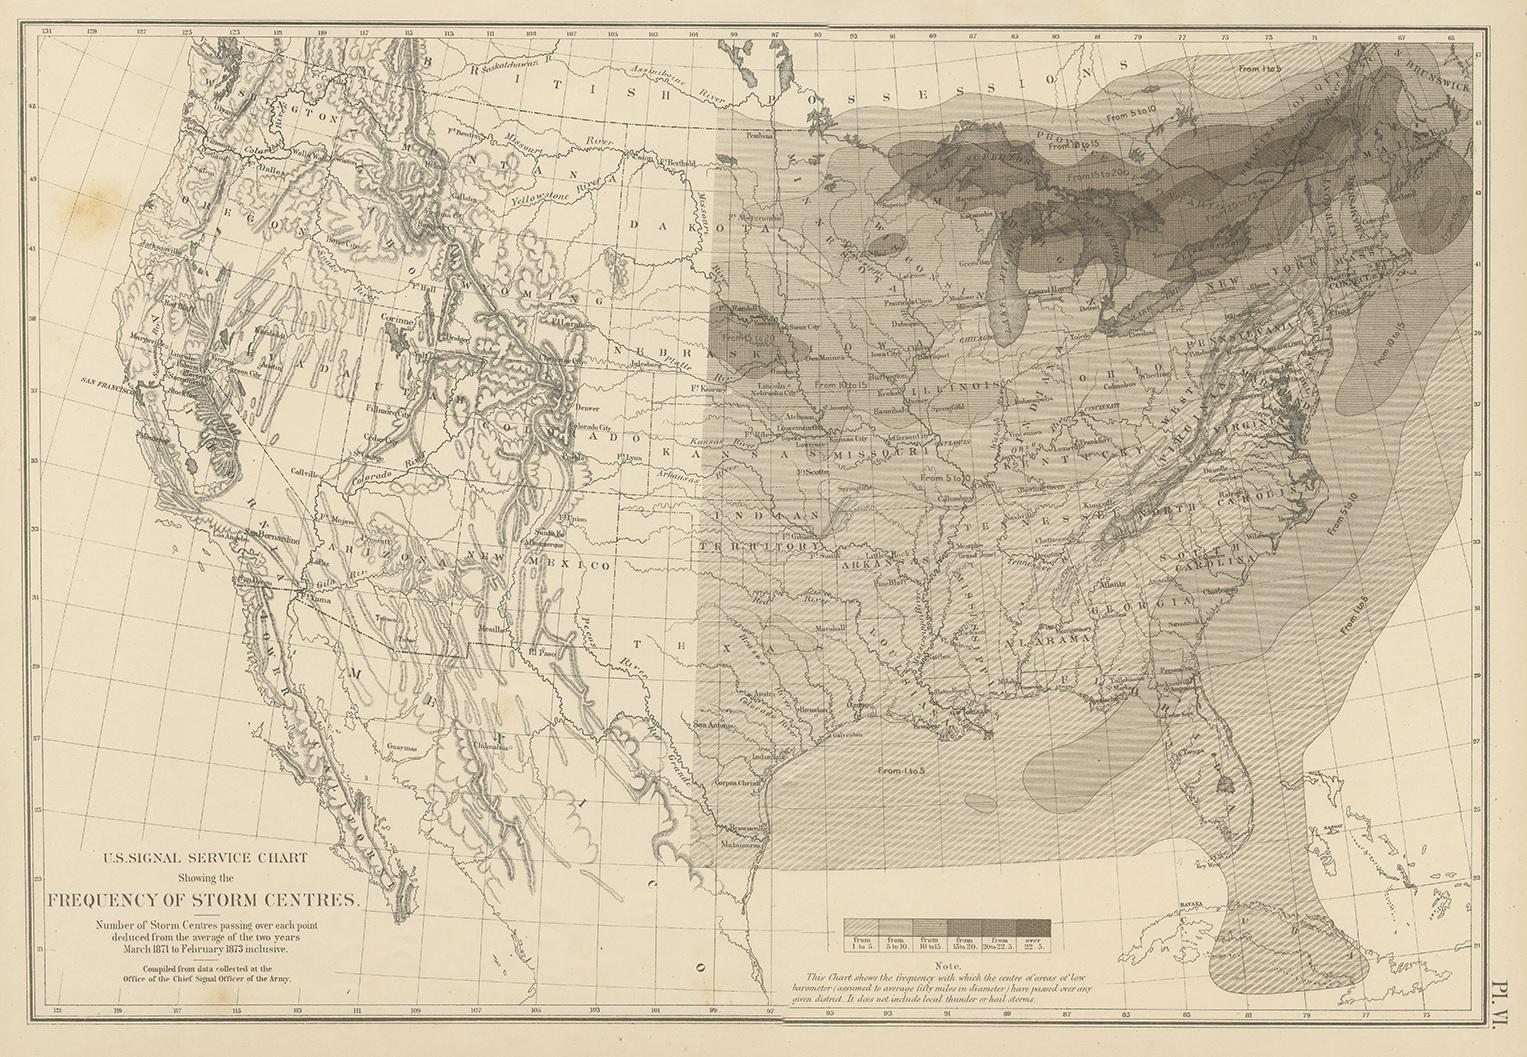 Antique chart titled 'U.S. Signal Service chart showing the frequency of storm centres. Number of storm centres passing over each point deduced from the average of the two years March 1871 to February 1873 inclusive. Compiled from data collected at